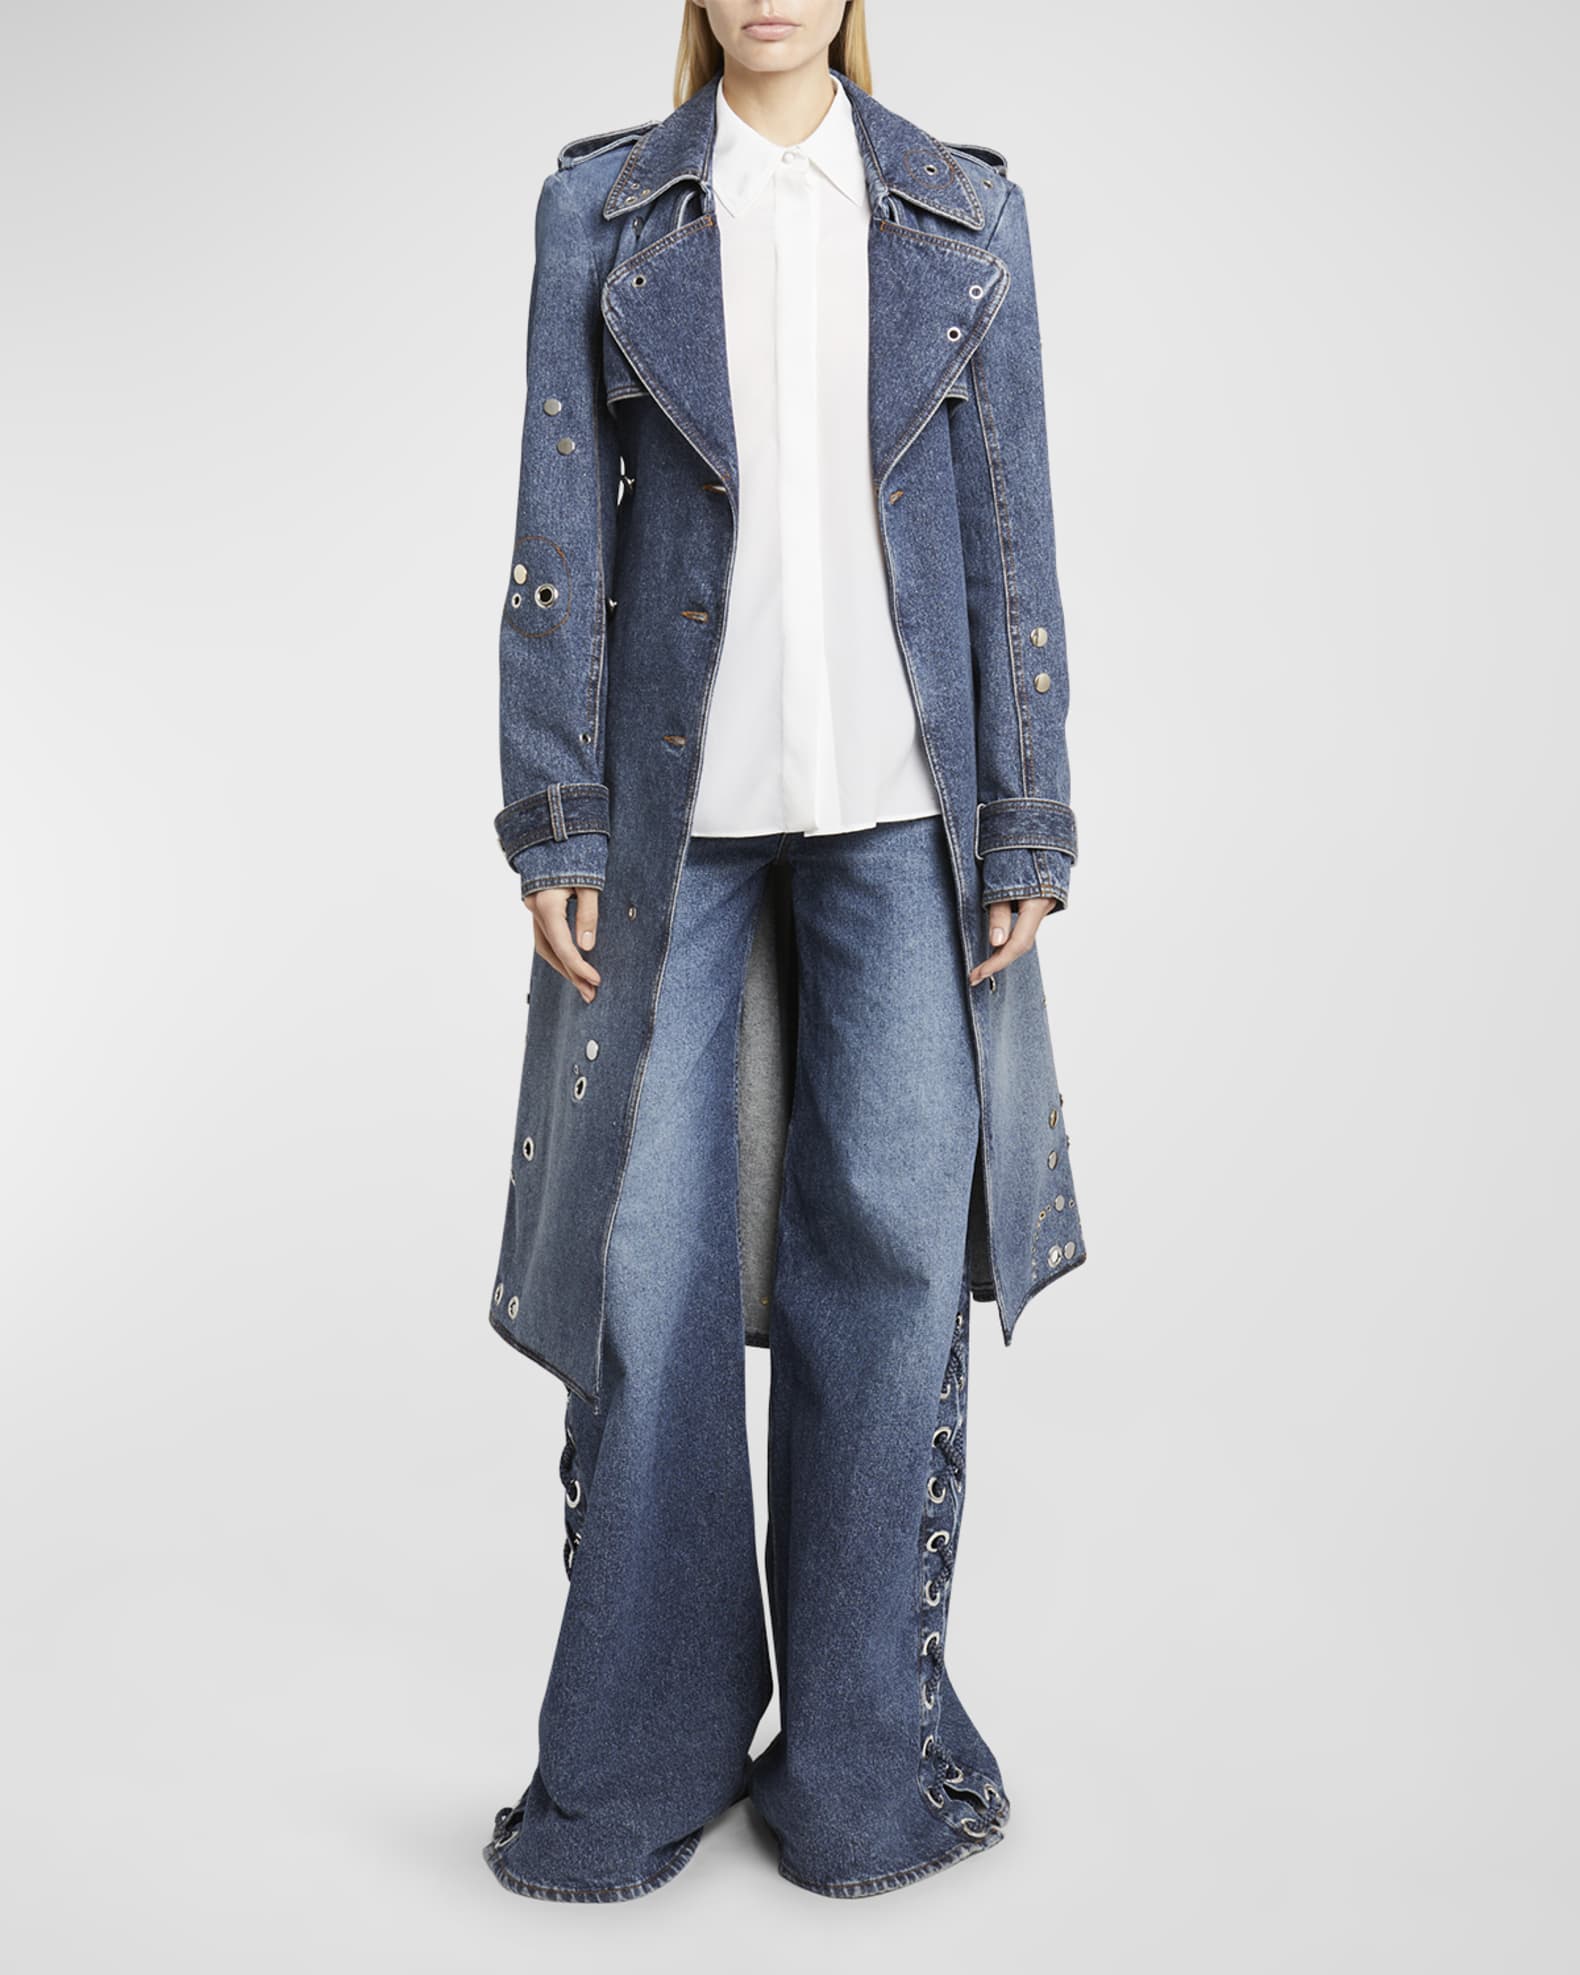 Chloe Vintage Denim Trench with Eyelet Detail | Neiman Marcus